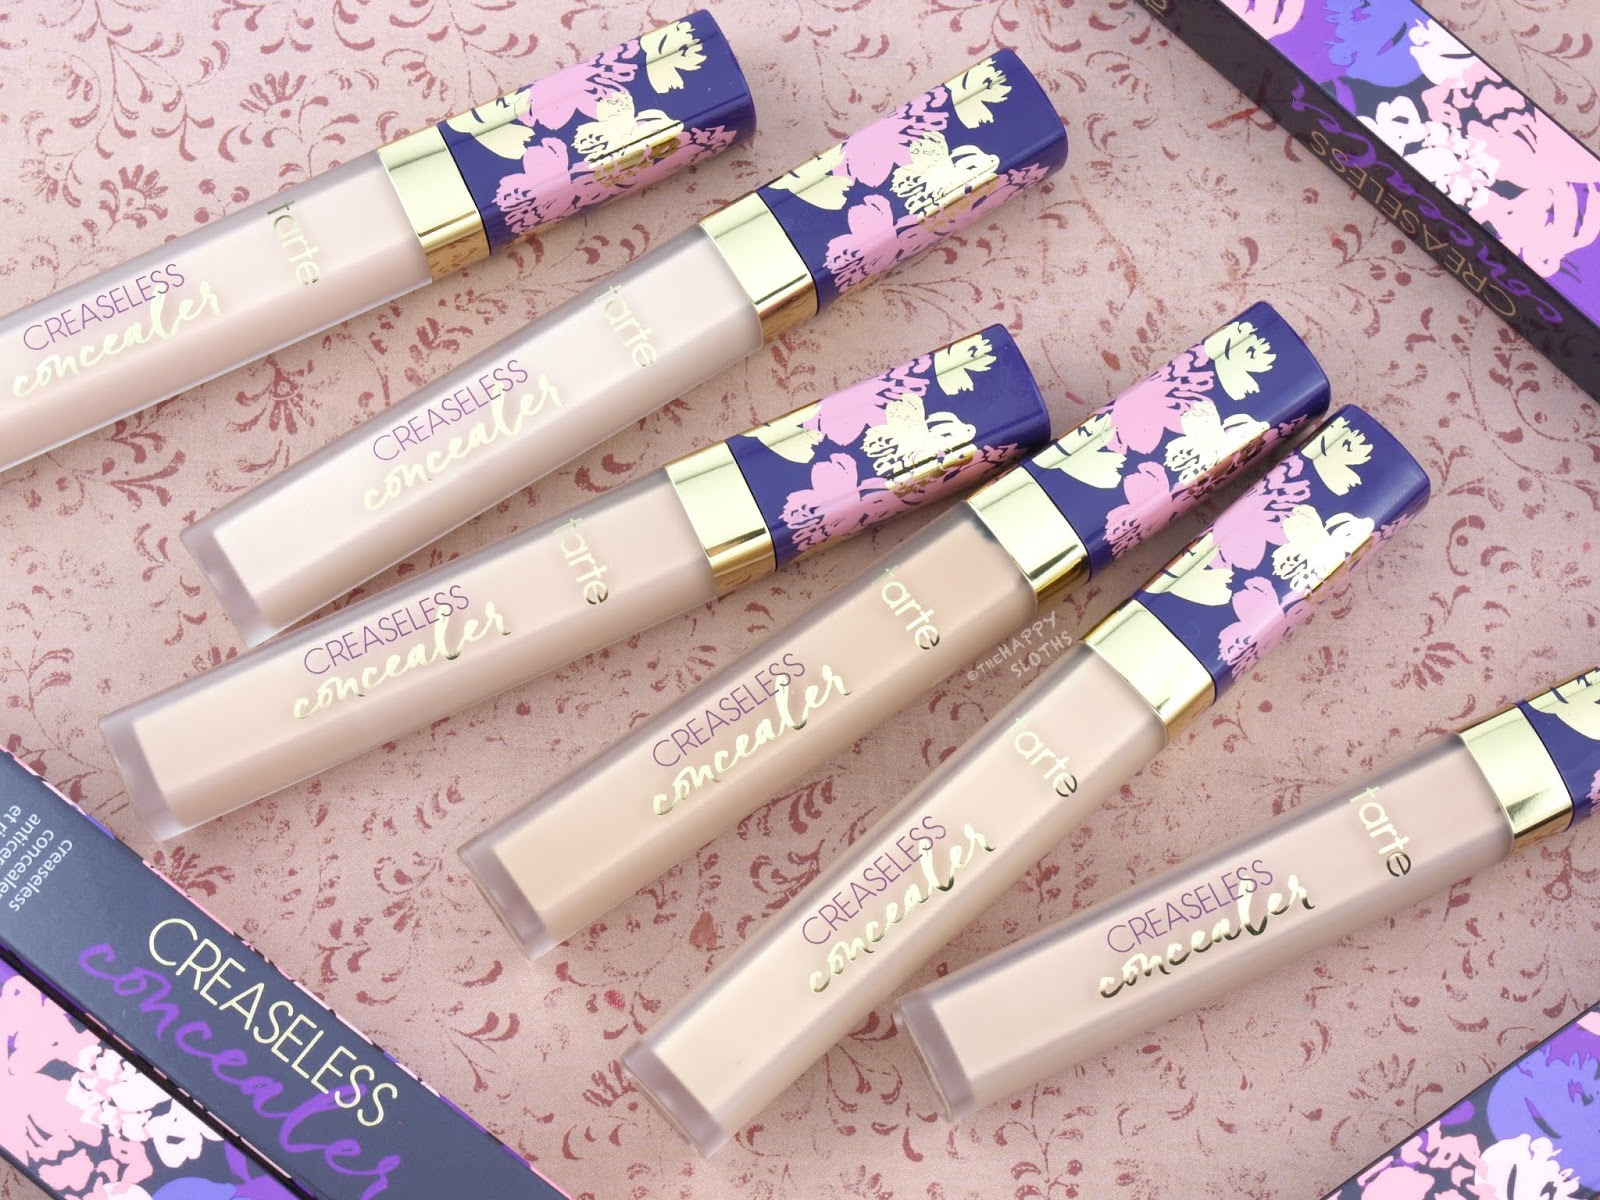 Tarte | Creaseless Concealer: Review and Swatches